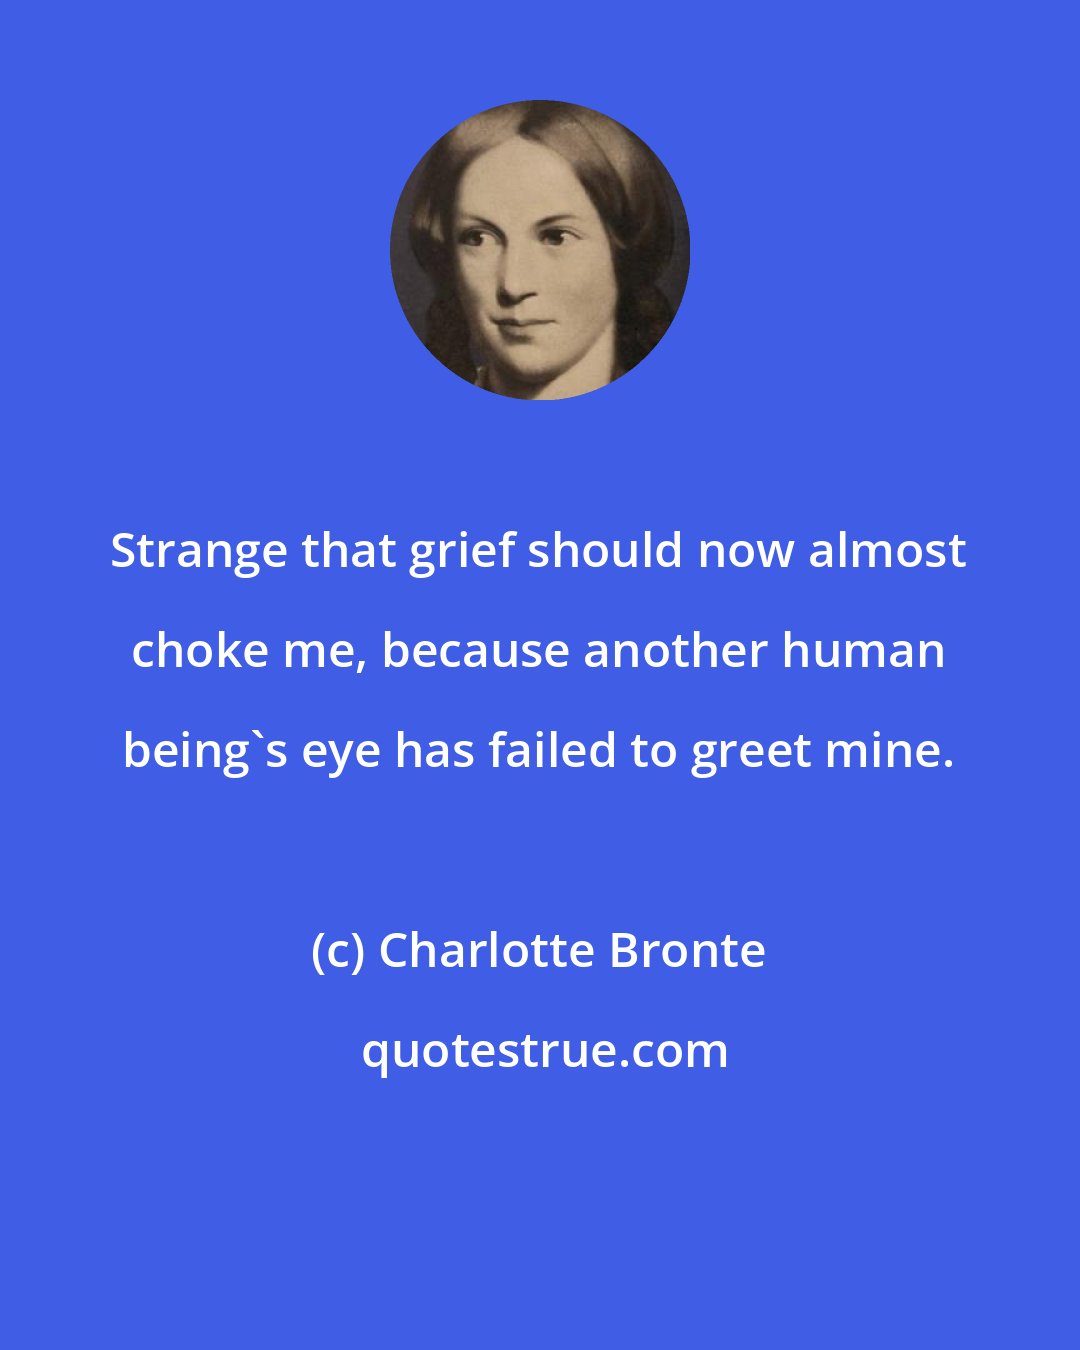 Charlotte Bronte: Strange that grief should now almost choke me, because another human being's eye has failed to greet mine.